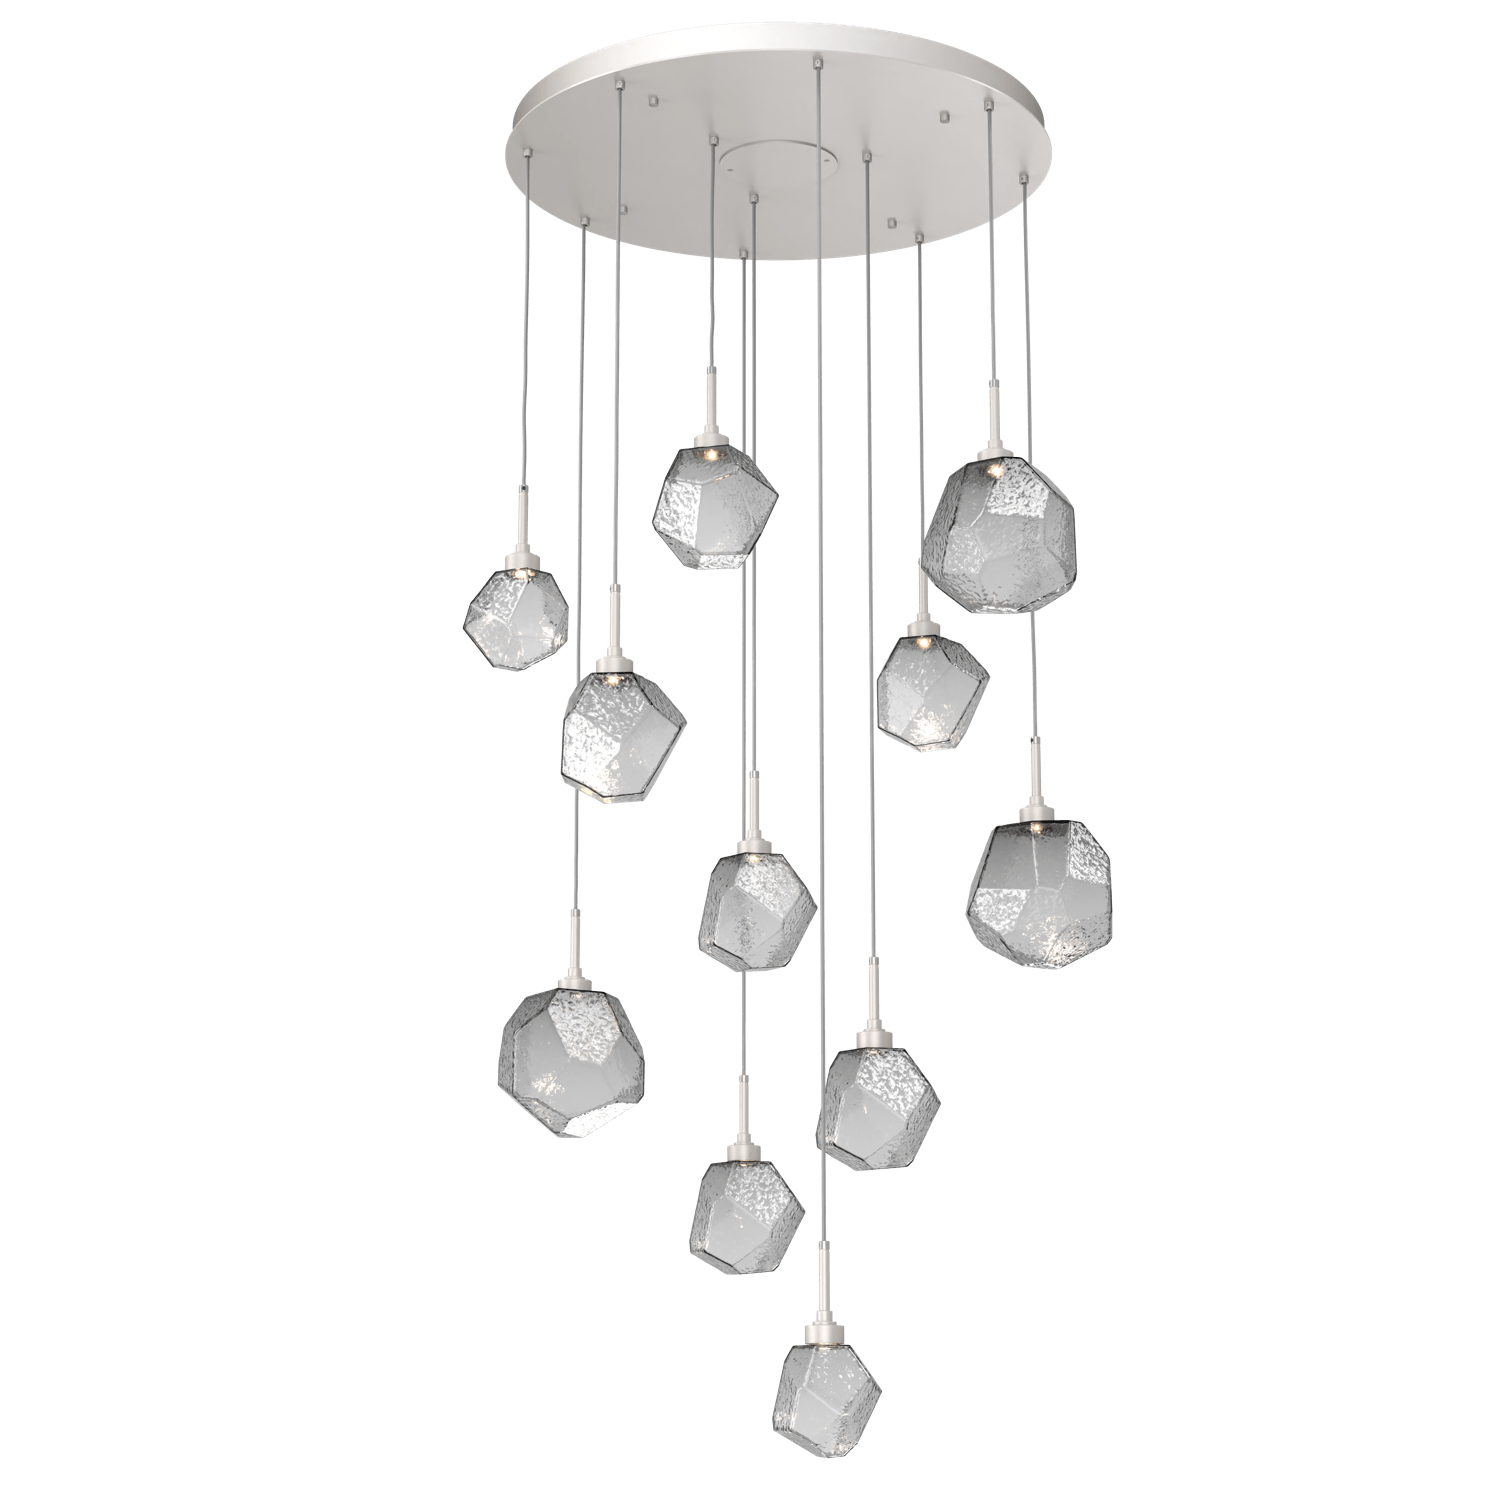 CHB0039-11-BS-S-Hammerton-Studio-Gem-11-light-round-pendant-chandelier-with-metallic-beige-silver-finish-and-smoke-blown-glass-shades-and-LED-lamping